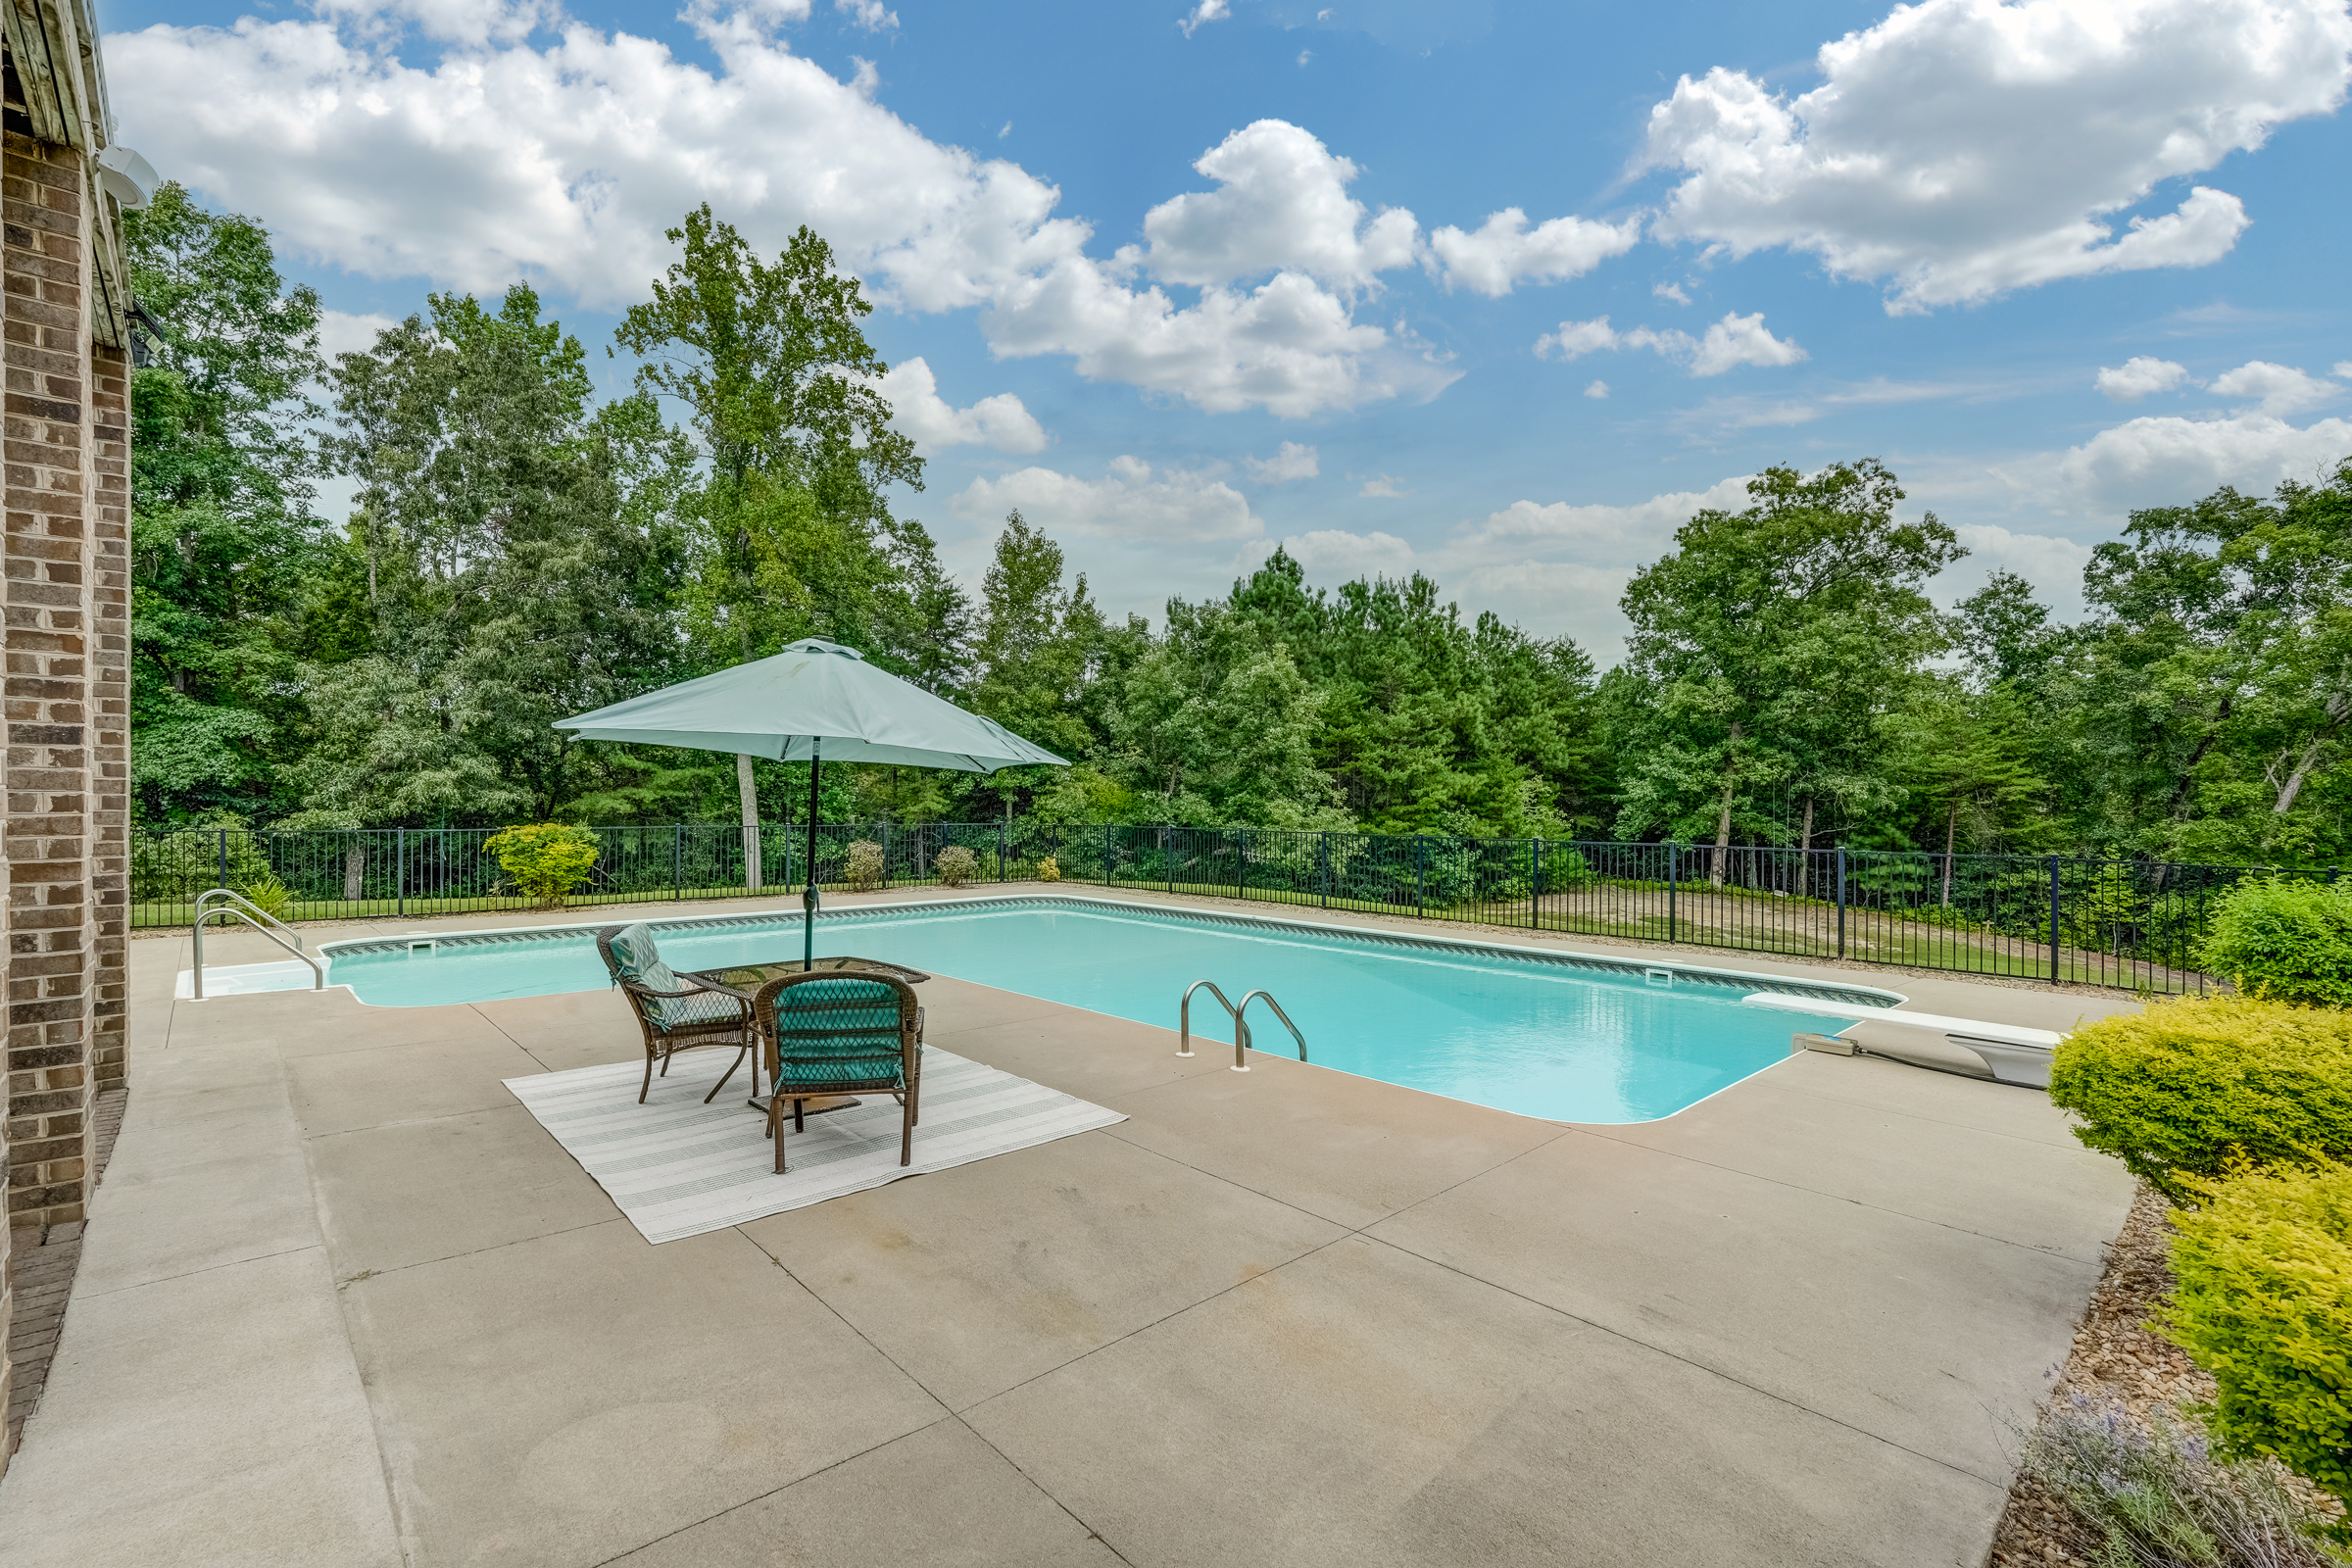 Enjoy your own private oasis with this lovely heated, saltwater pool overlooking the expansive backyard